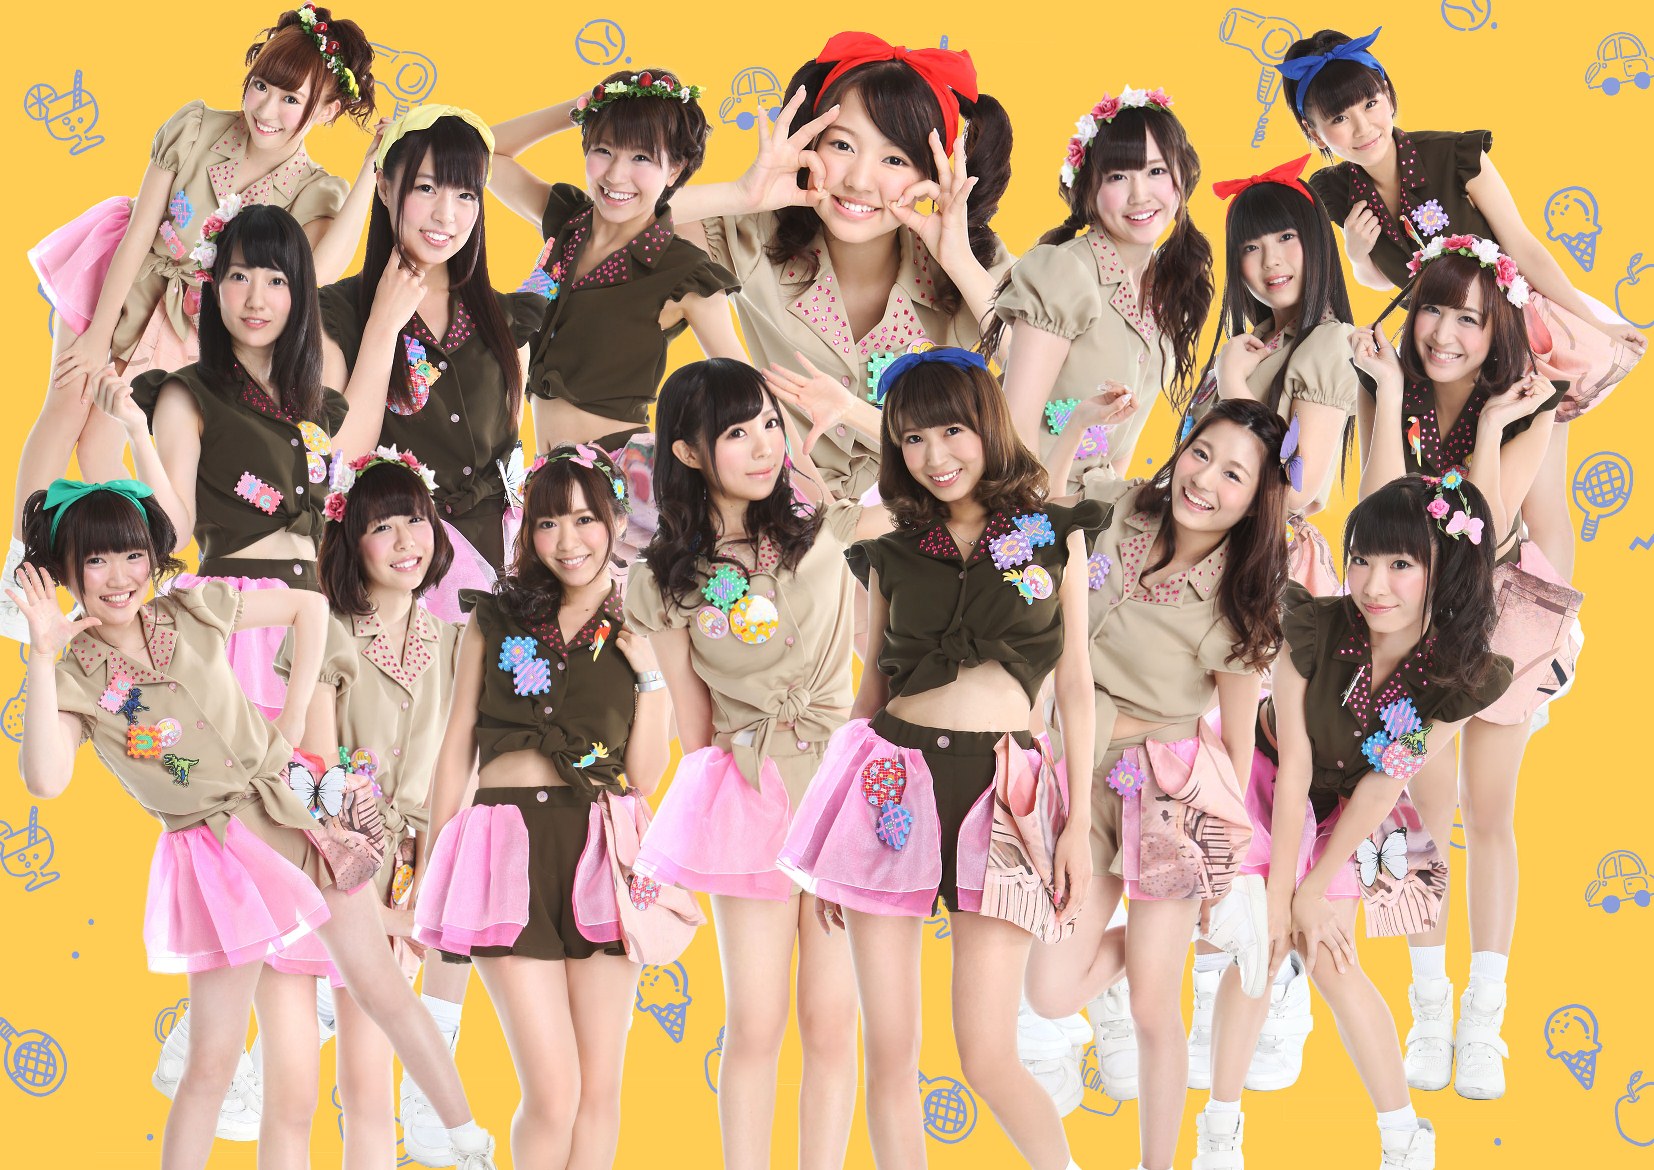 A First Look at the Outfits and Cover Art for LinQ’s 5th Single “Wessai!! Gassai!!”